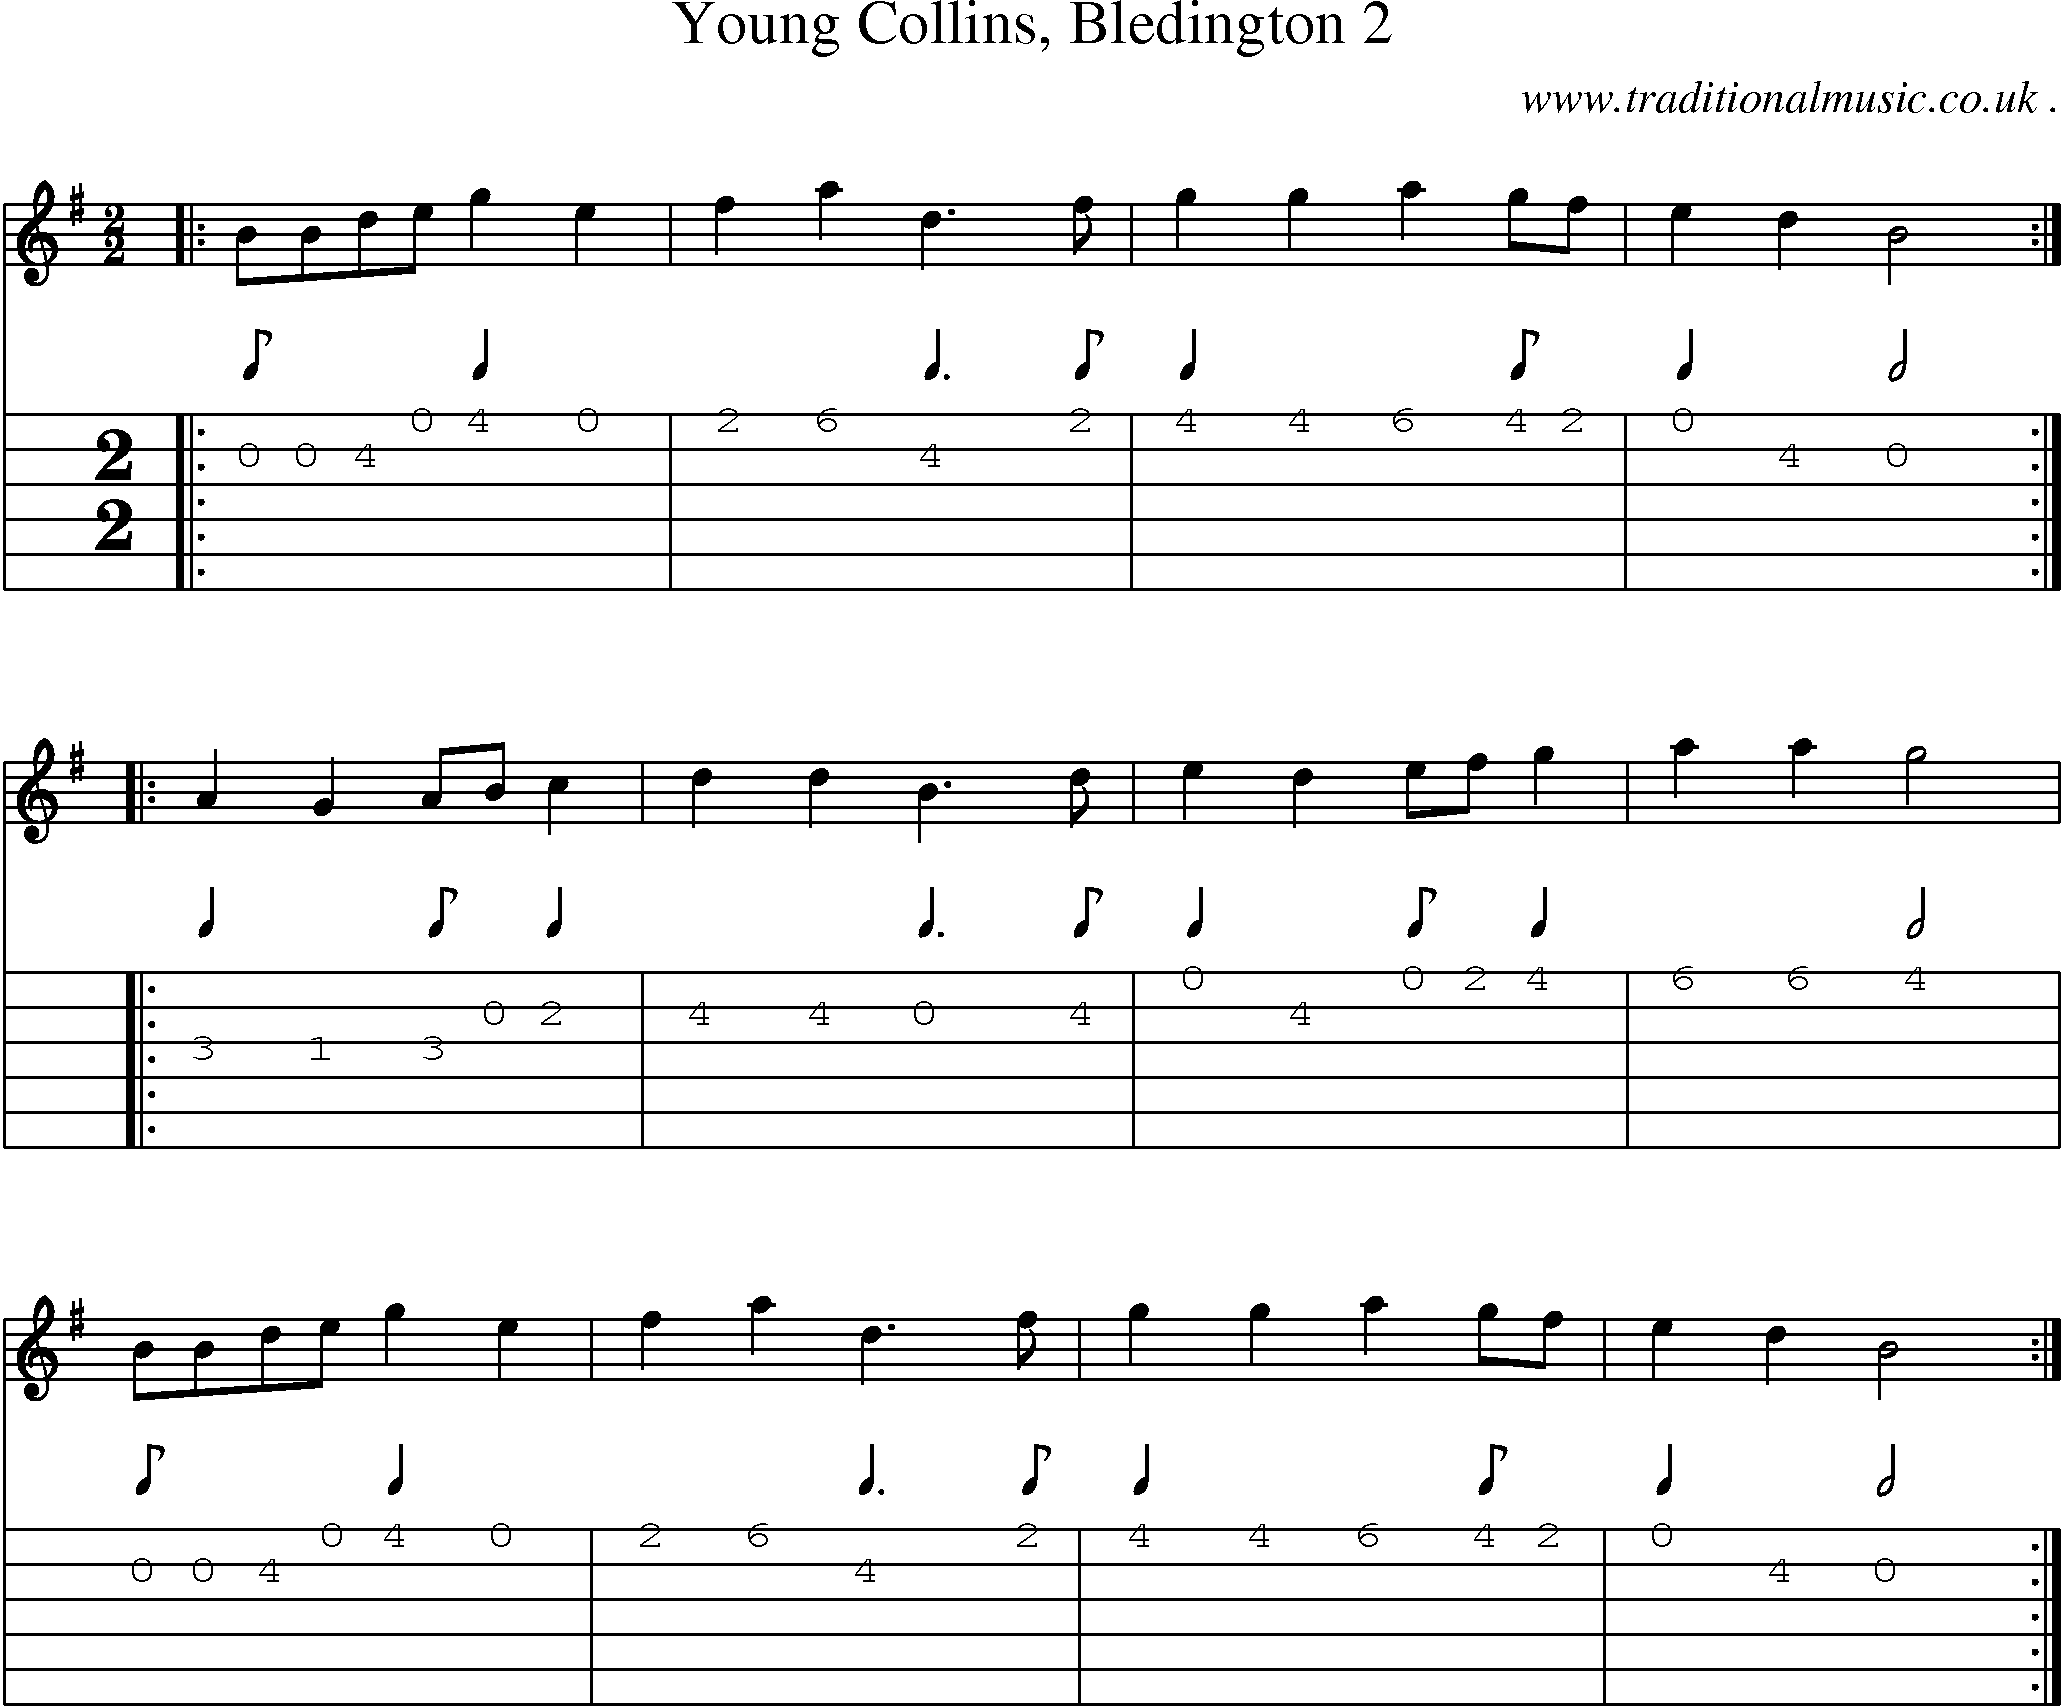 Sheet-Music and Guitar Tabs for Young Collins Bledington 2